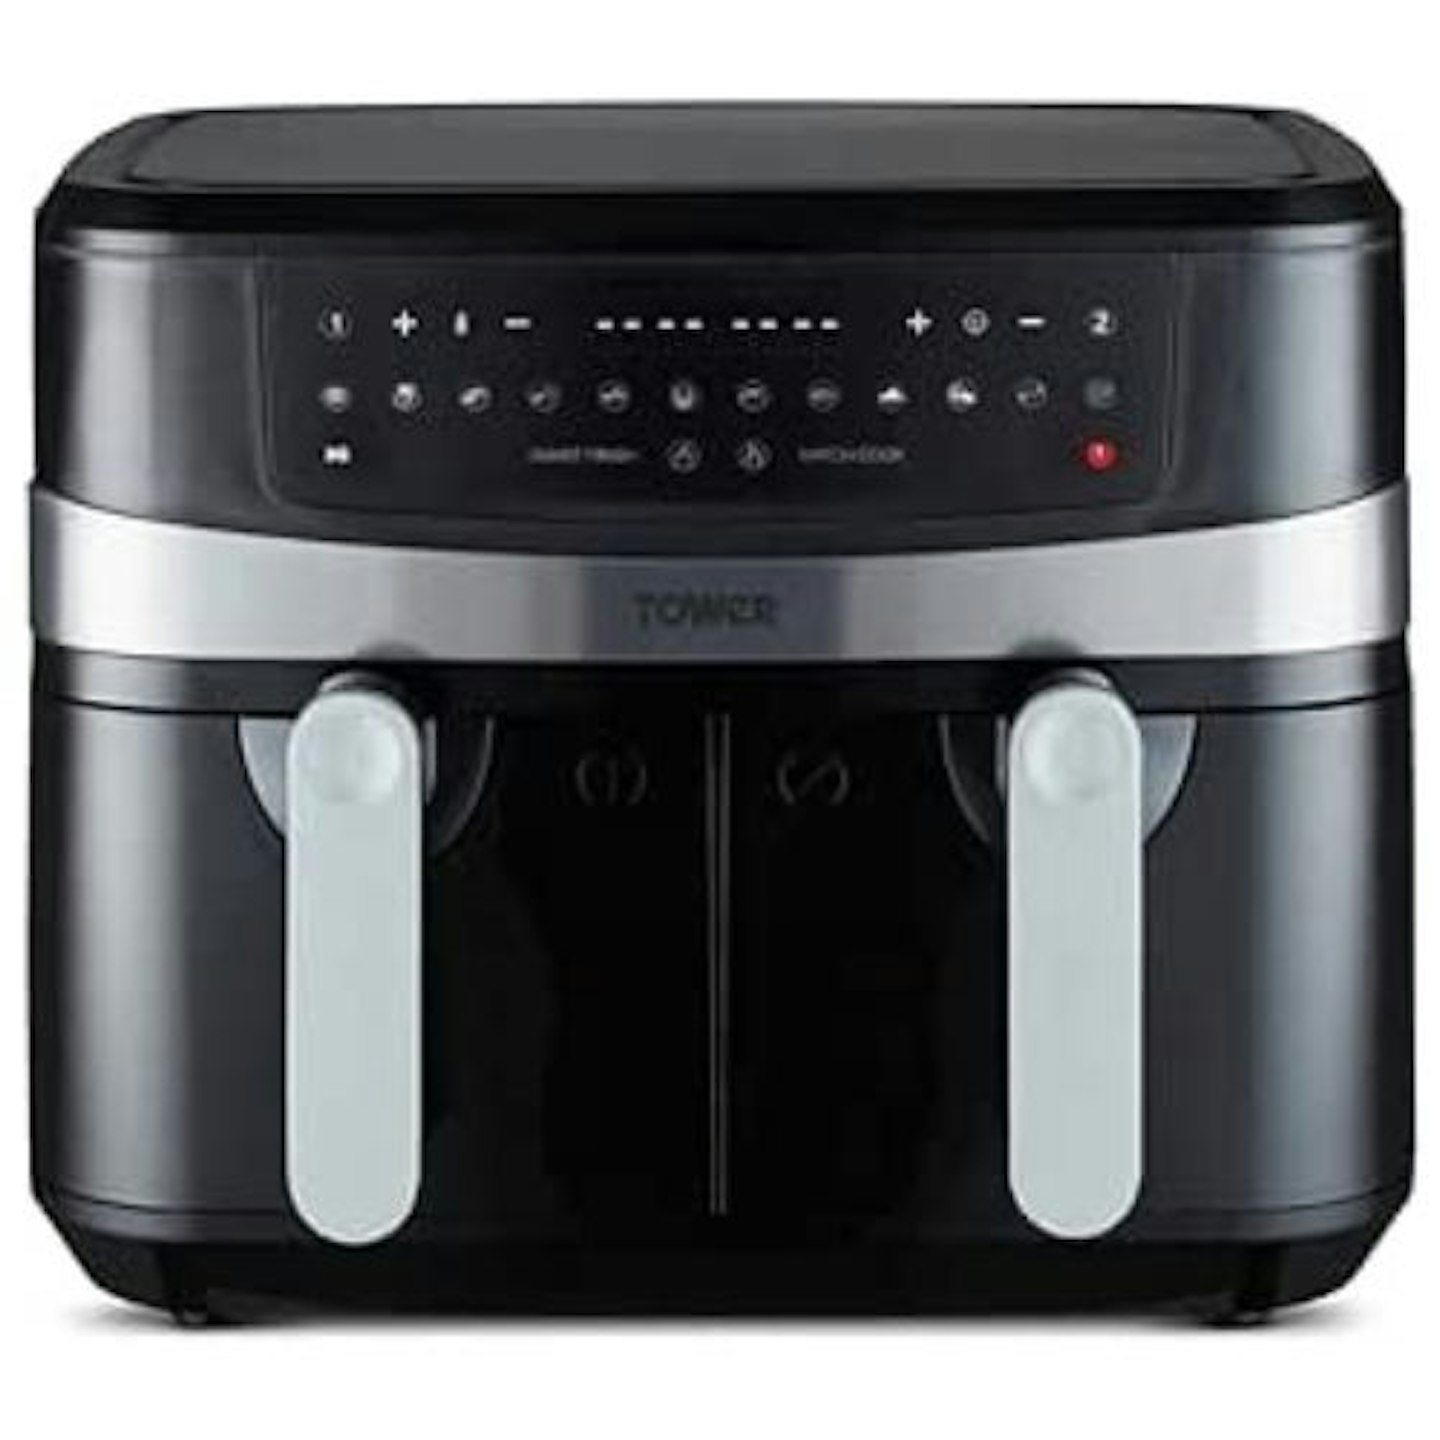 Tower T17088 Vortx 9L Duo Basket Air Fryer with Smart Finish